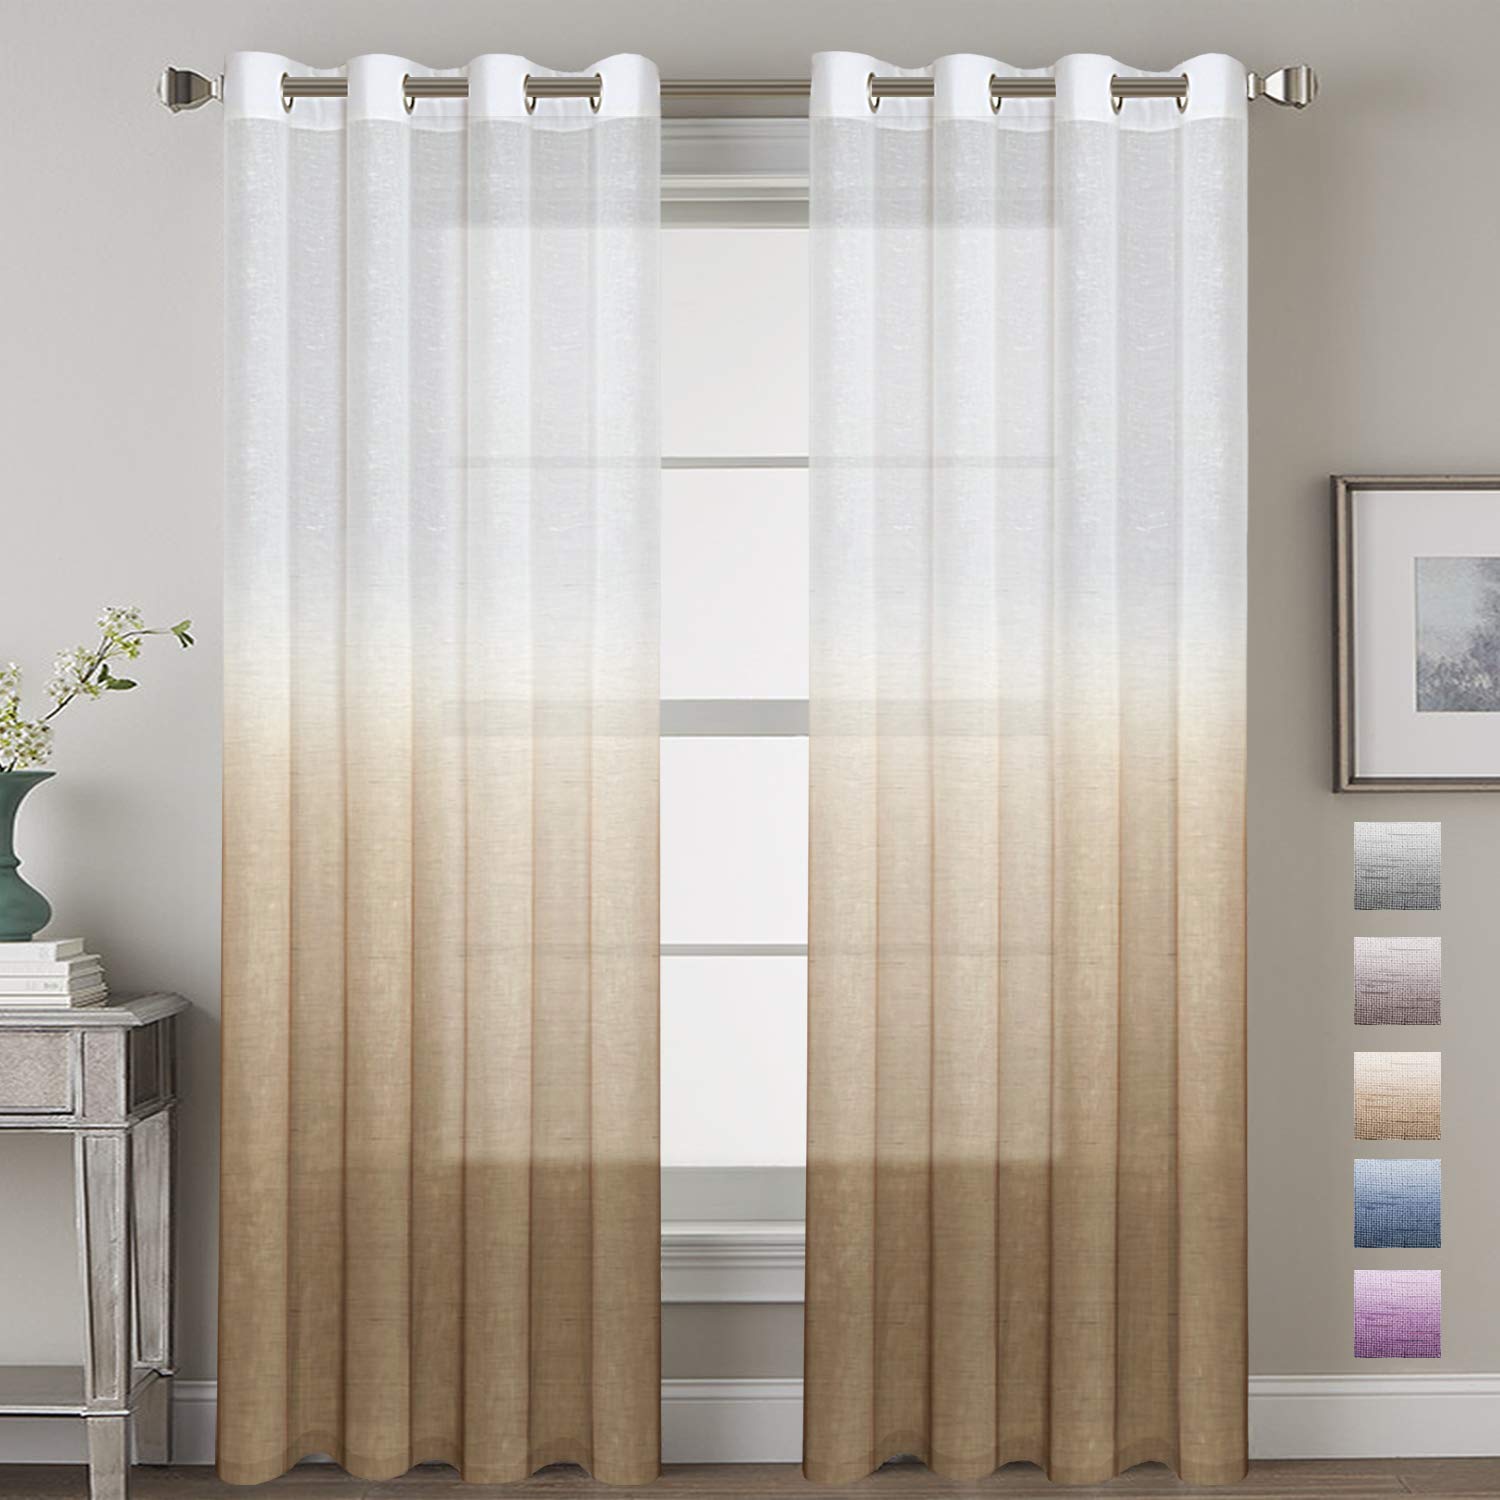 Book Cover Living Room Sheer Curtains Home Decorative Linen Blended Ombre Window Treatment Energy Saving Nickel Grommet Curtain Panels for Bedroom /Living Room (Set of 2, Taupe, 52x84 - Inch)